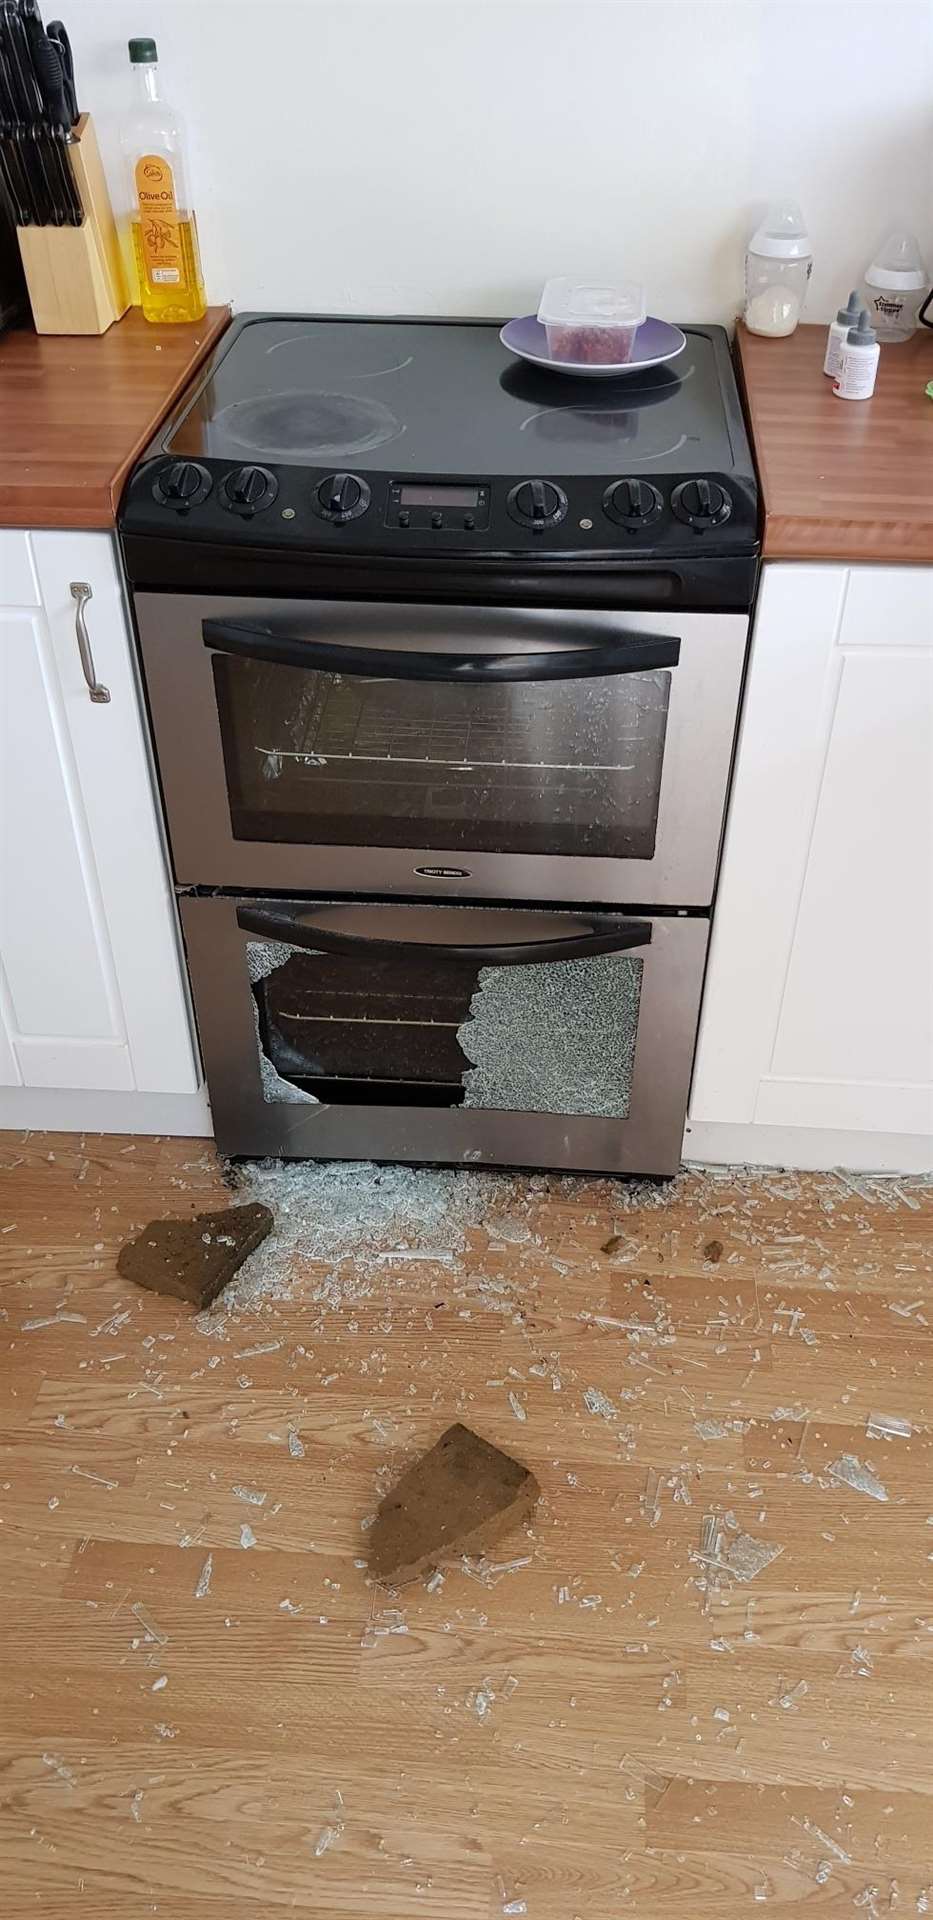 The couple's cooker was also smashed (5931338)